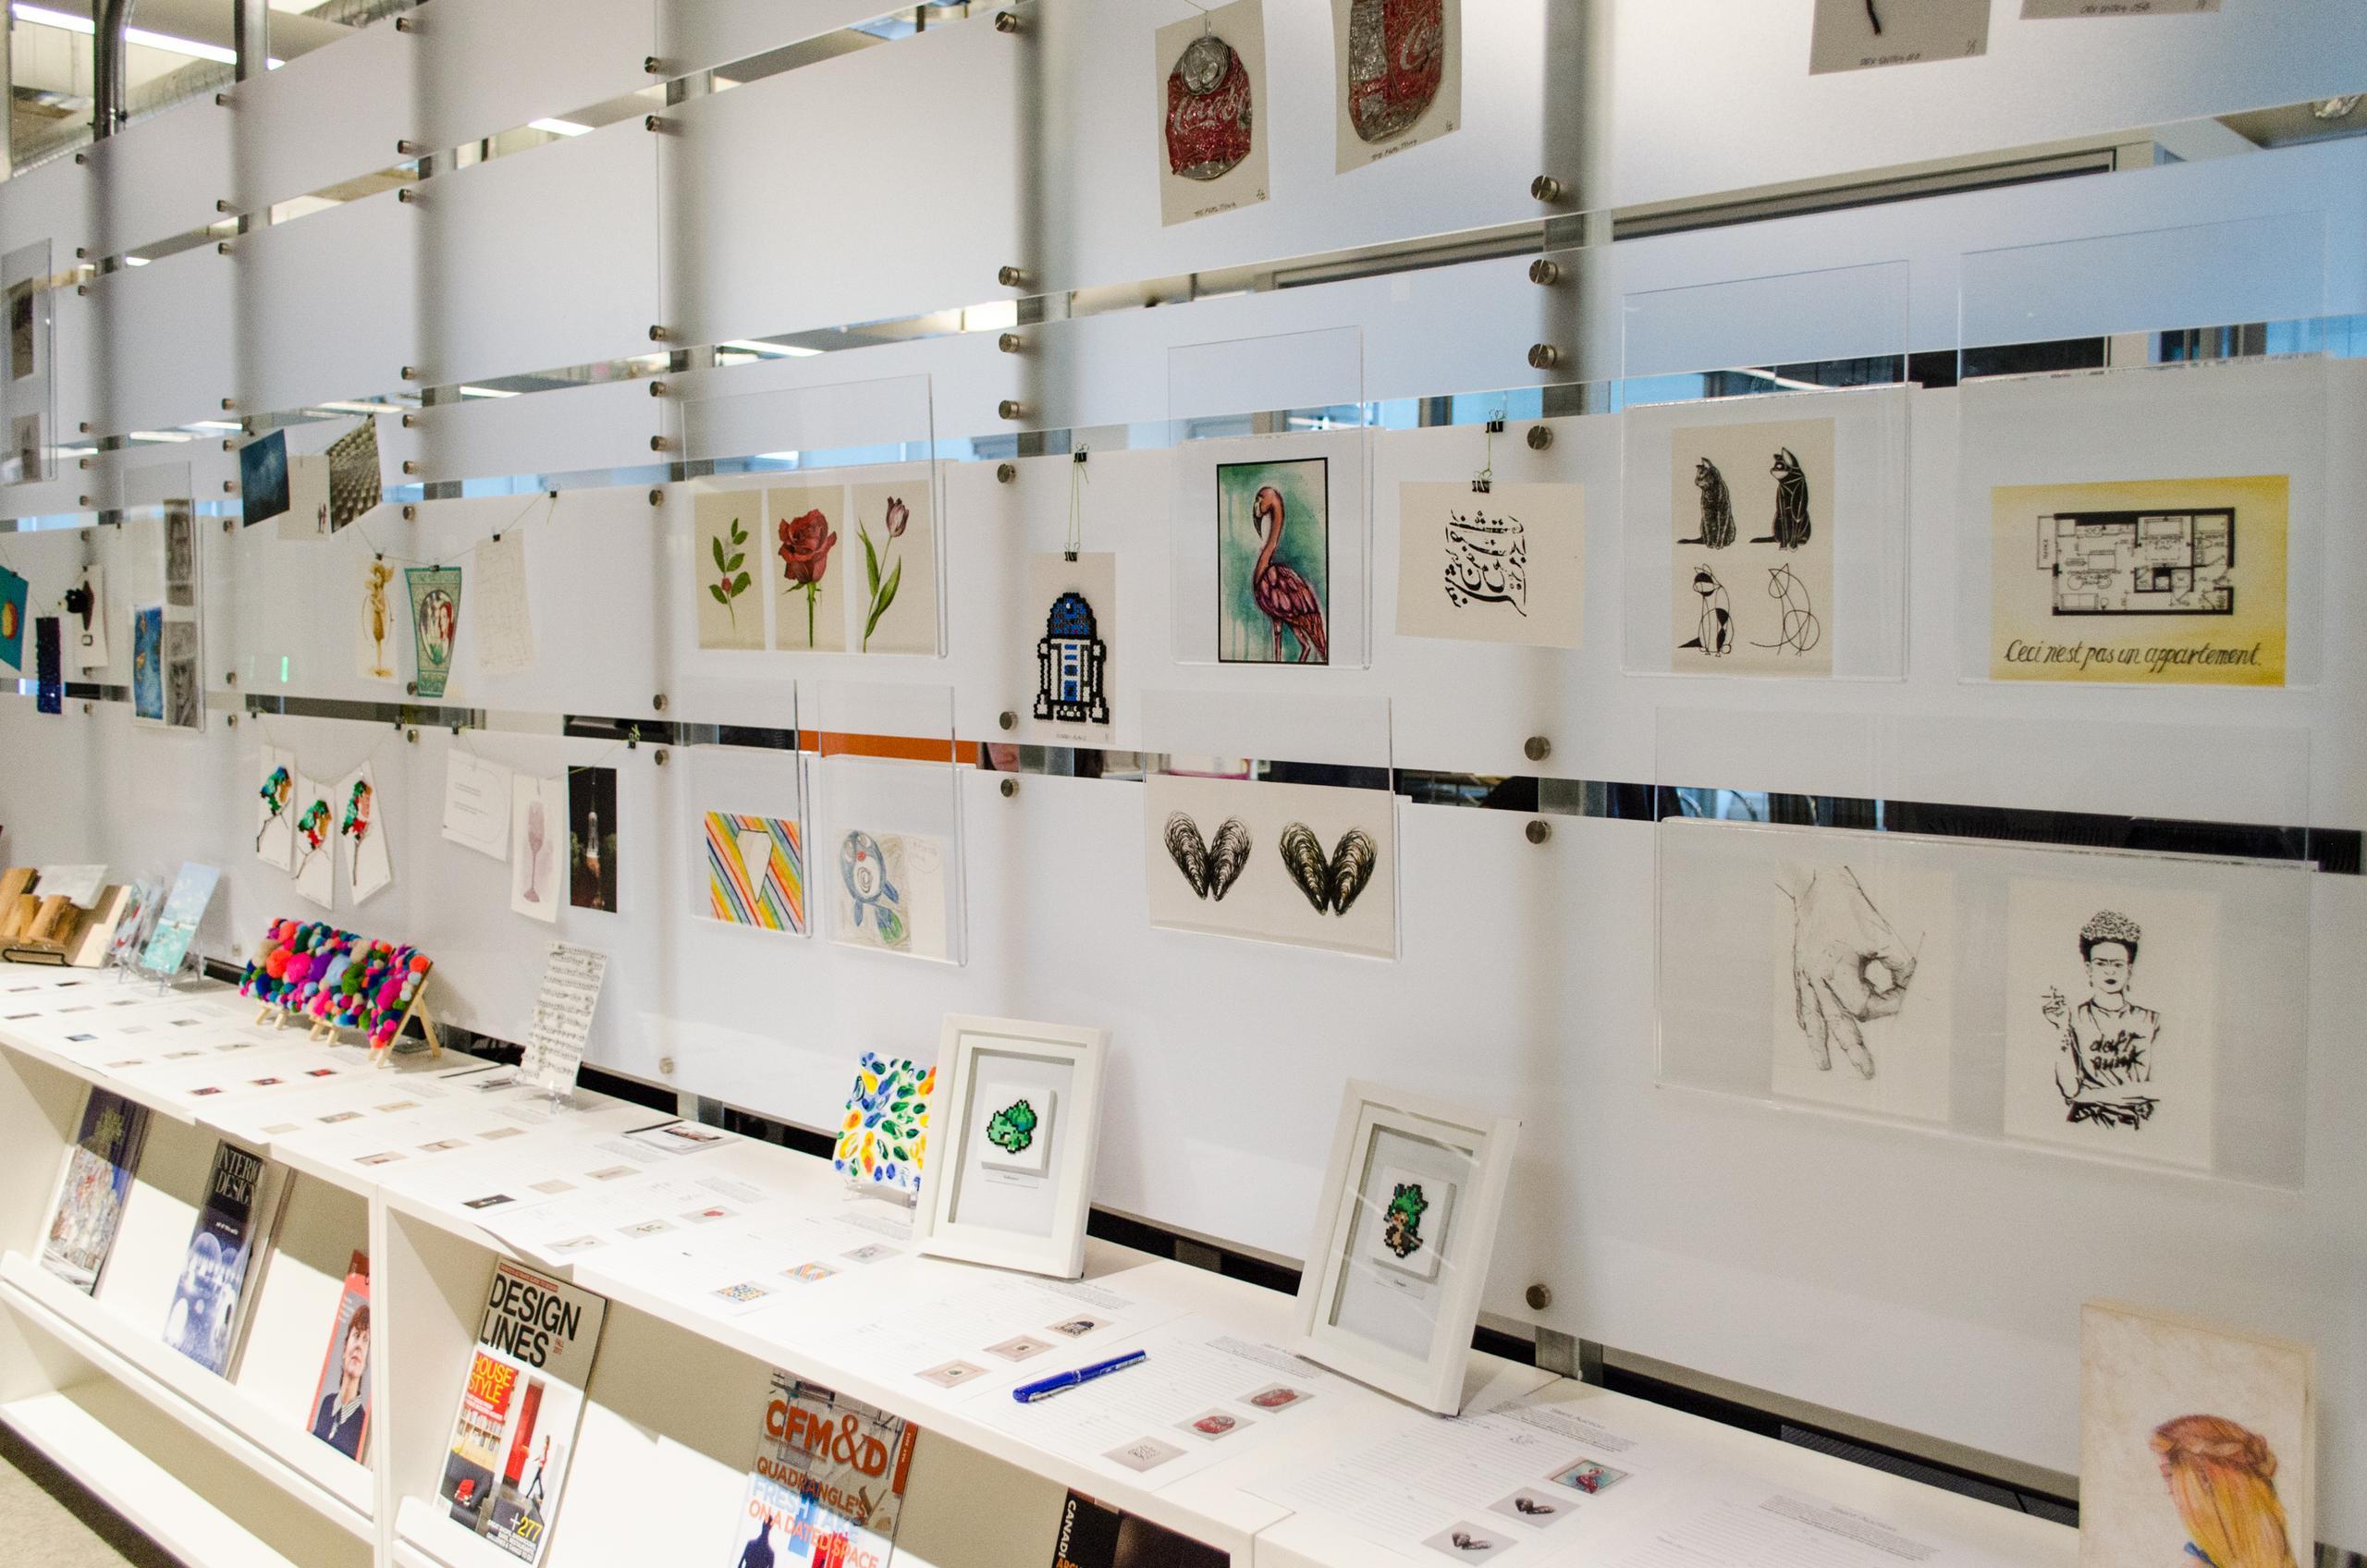 lots of postcard sized artwork hung up on a wall display in the Quadrangle studio alongside silent auction bid sheets